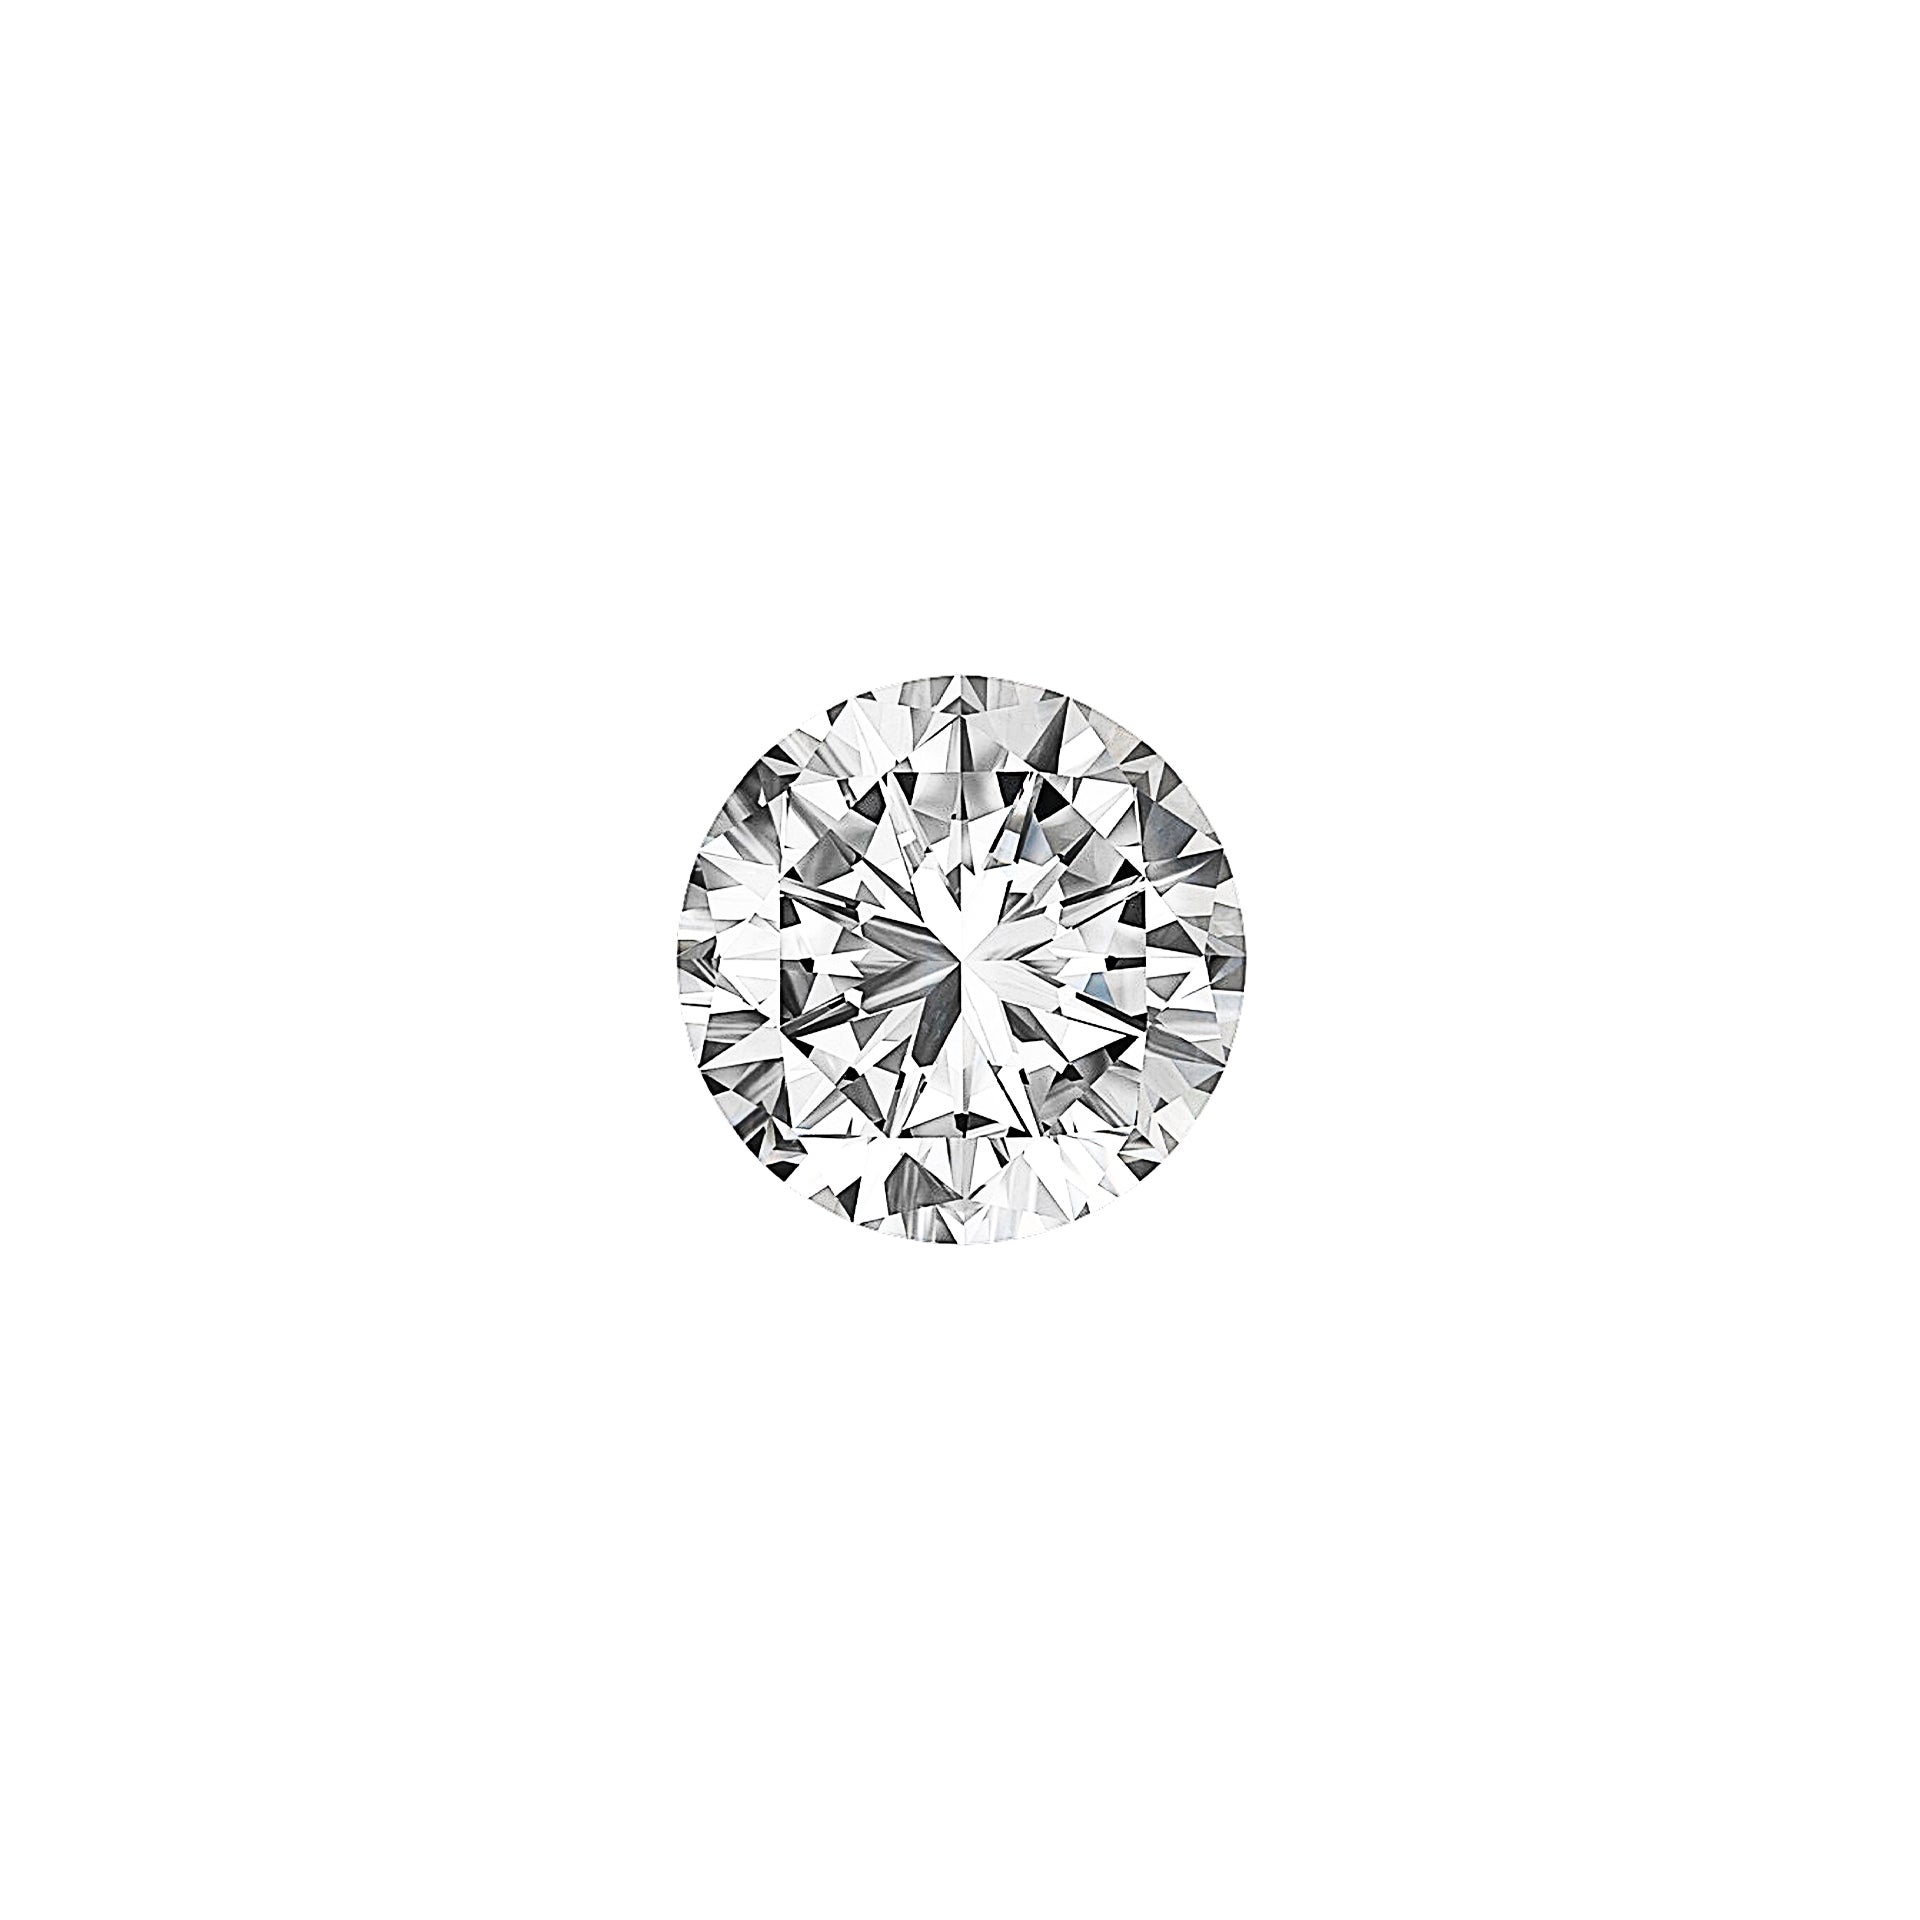 2-Carat MYZA Solitaire Only - MYZA 